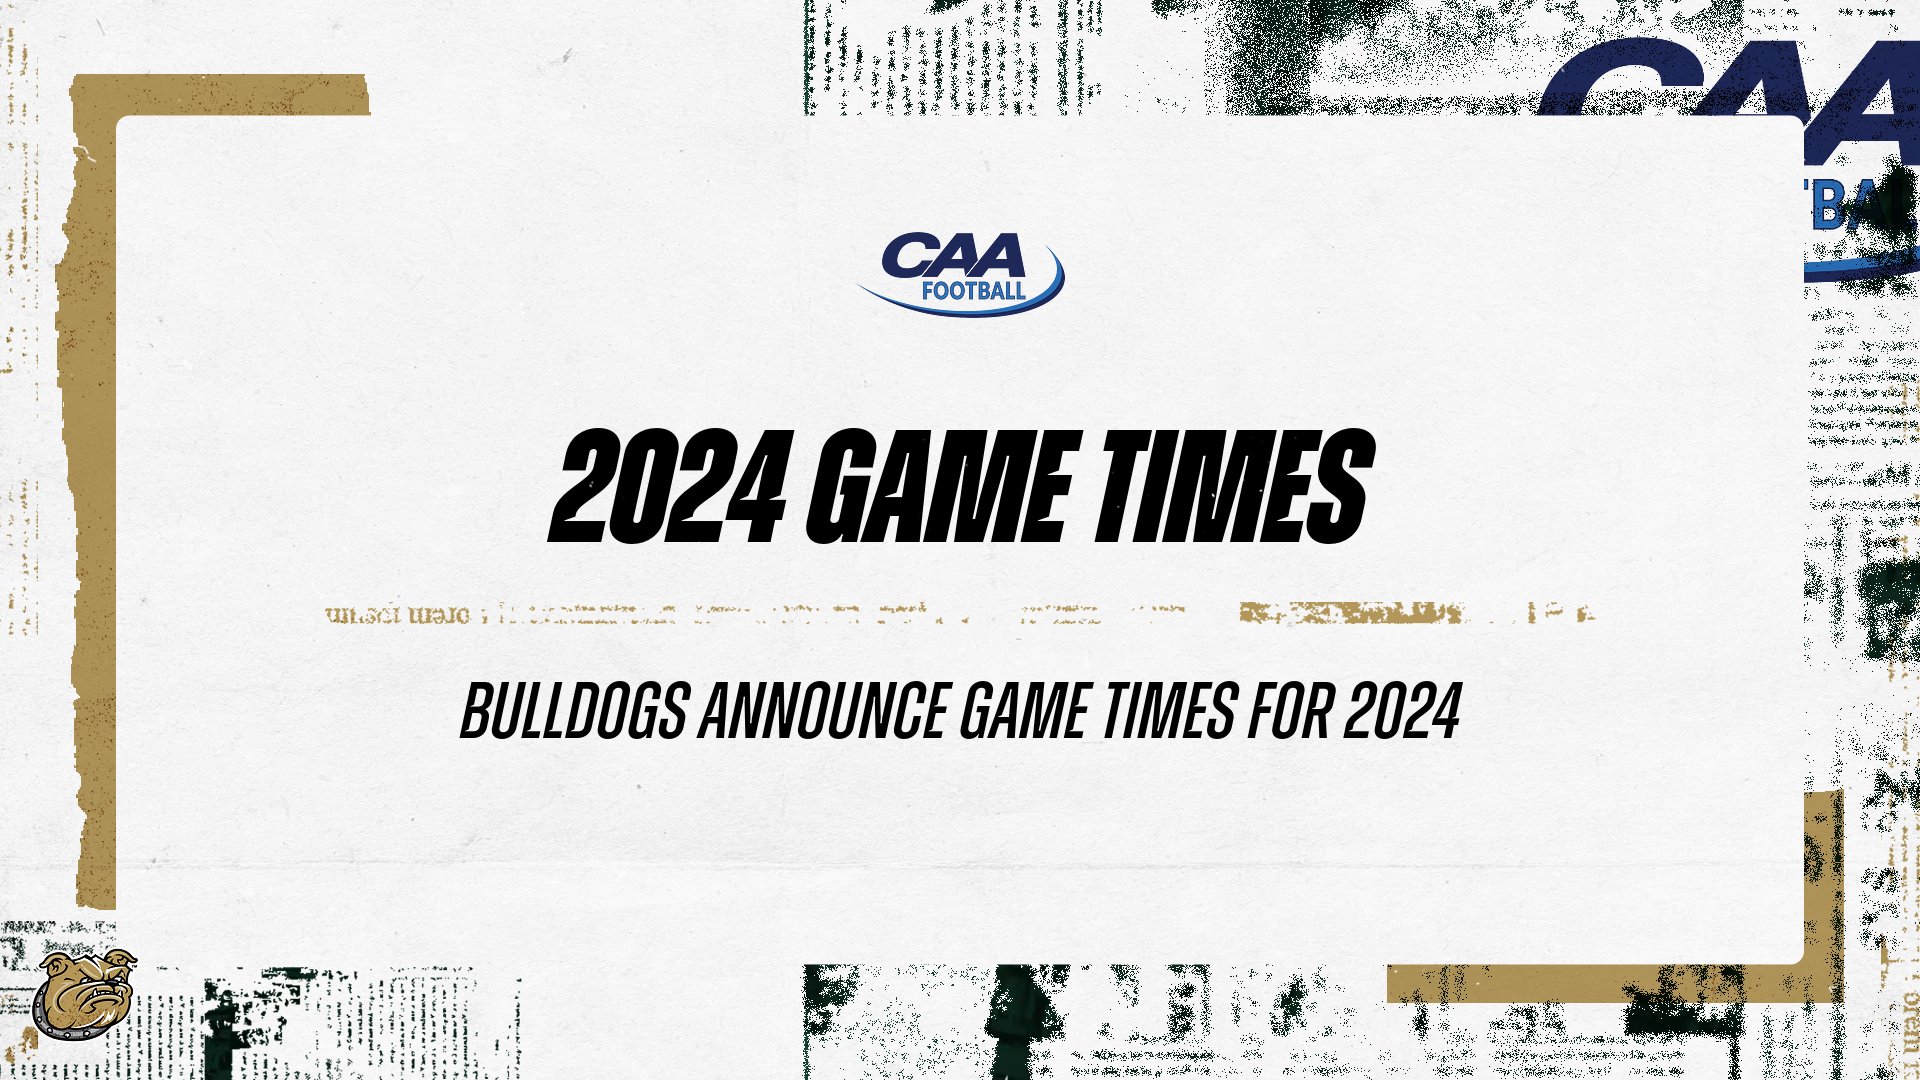 Bryant Football announces game times for 2024